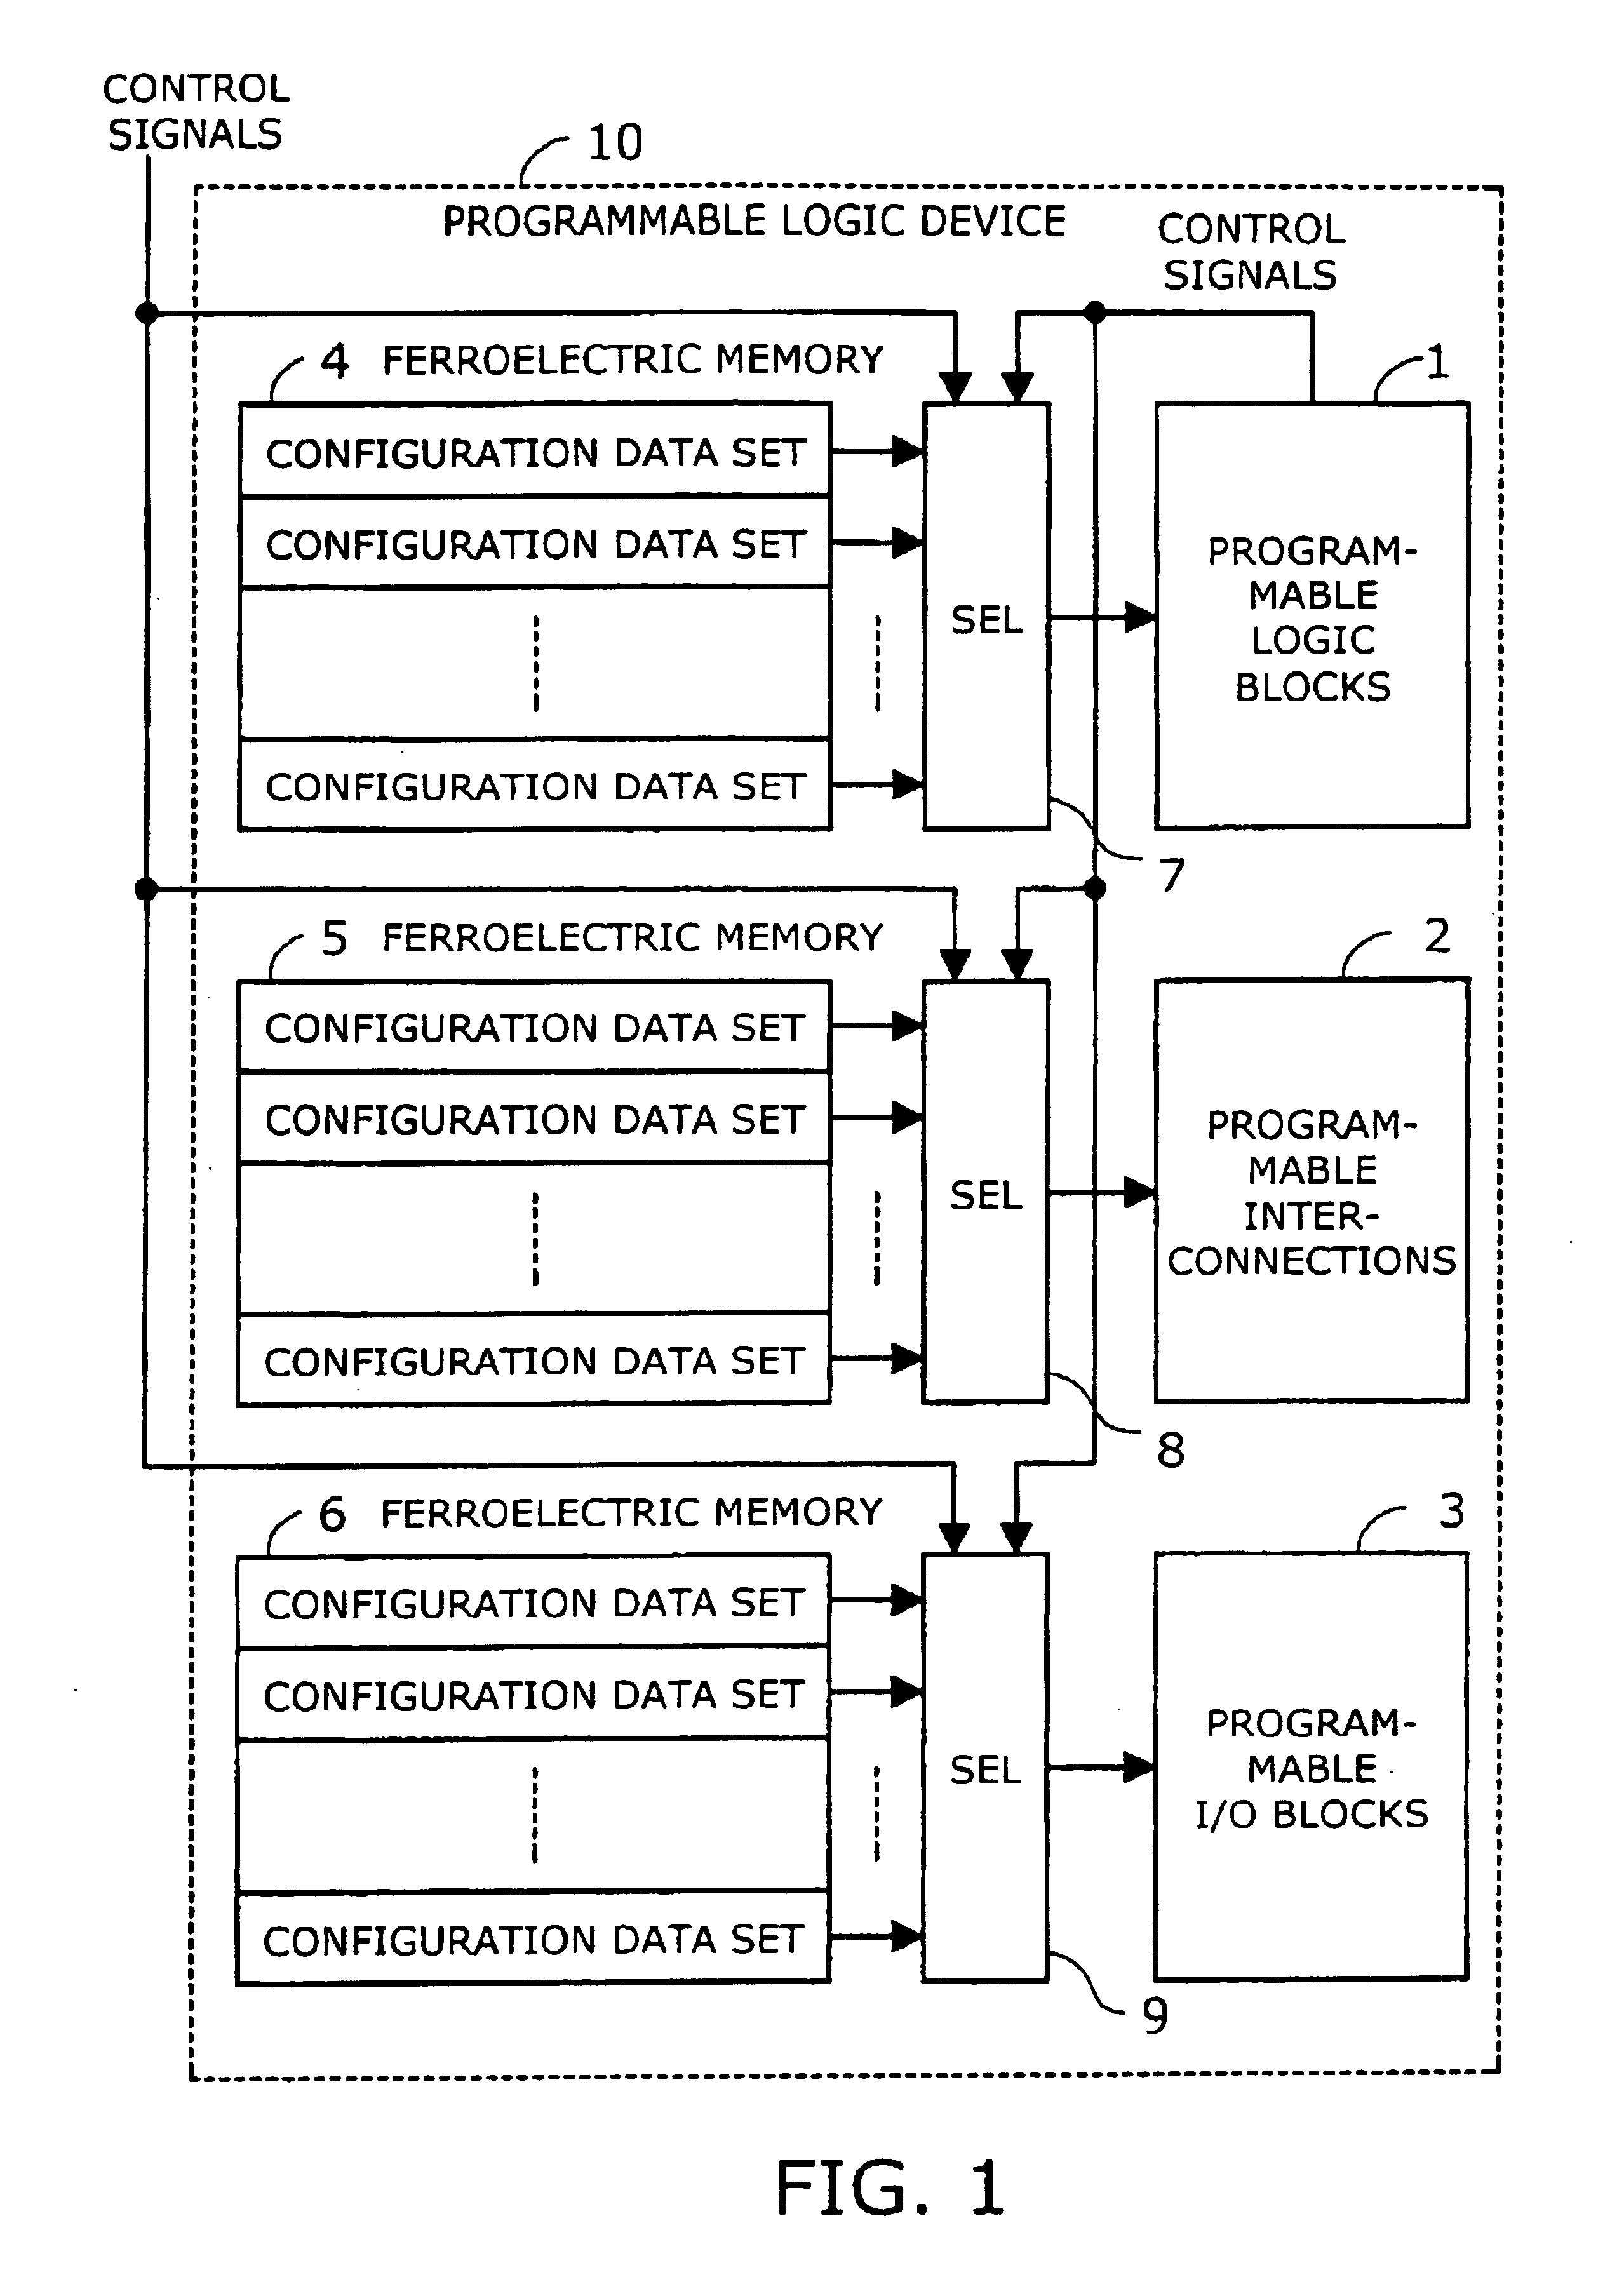 Programmable logic device with ferroelectric configuration memories